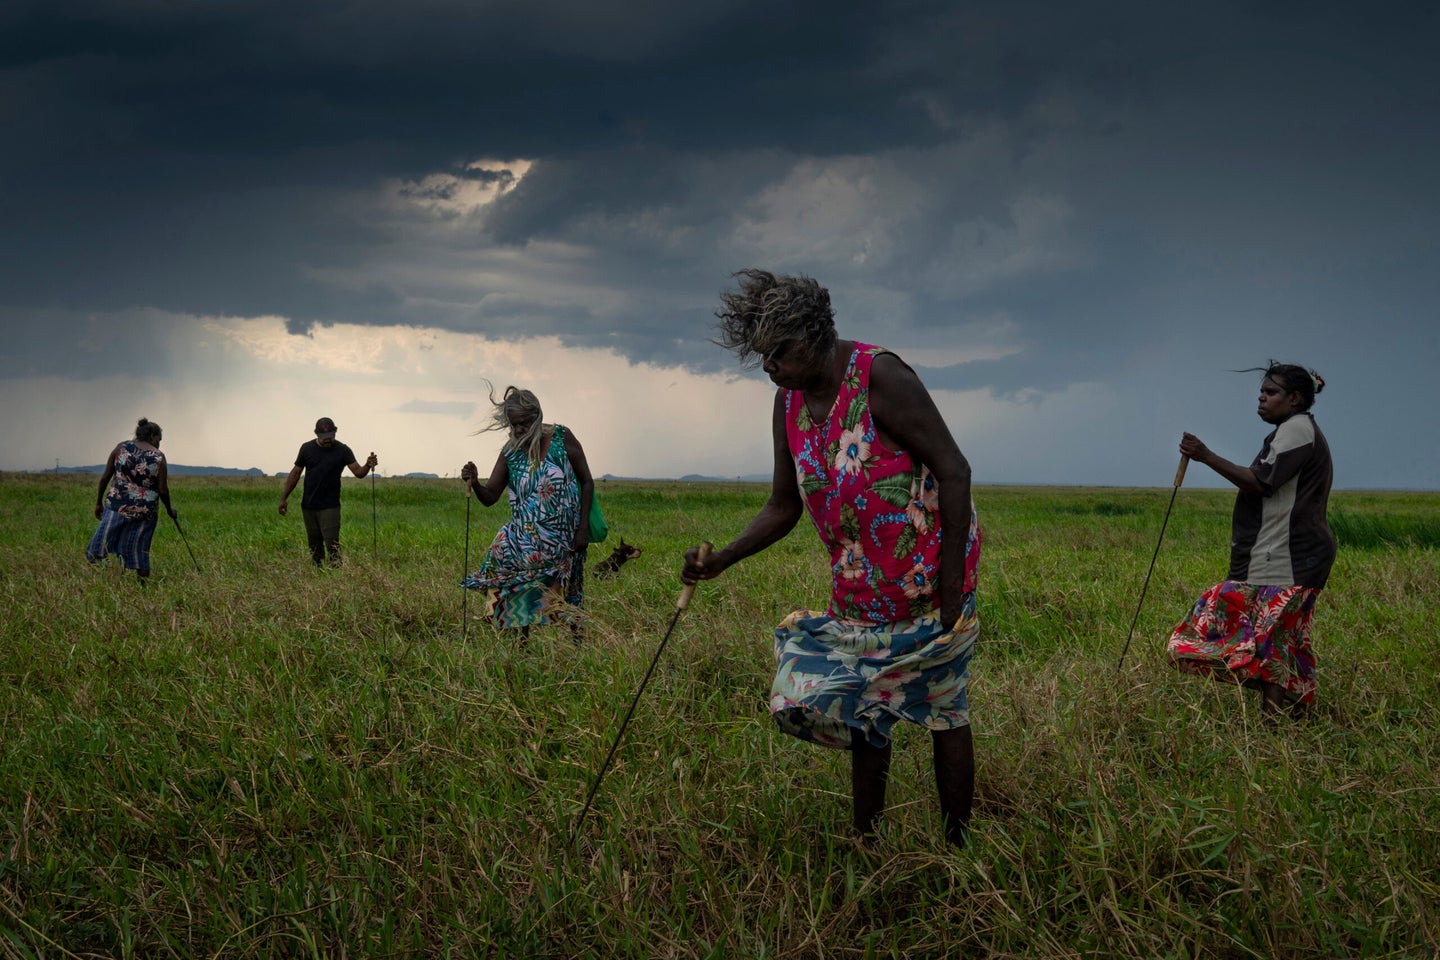 A group of Nawarddeken women elders hunt for turtles with homemade tools on floodplains near Gunbalanya, Arnhem Land, Australia on 31 October 2021. They spent all day finding just two turtles, which are a popular delicacy. Soon the grass will be burned to make the hunt easier.